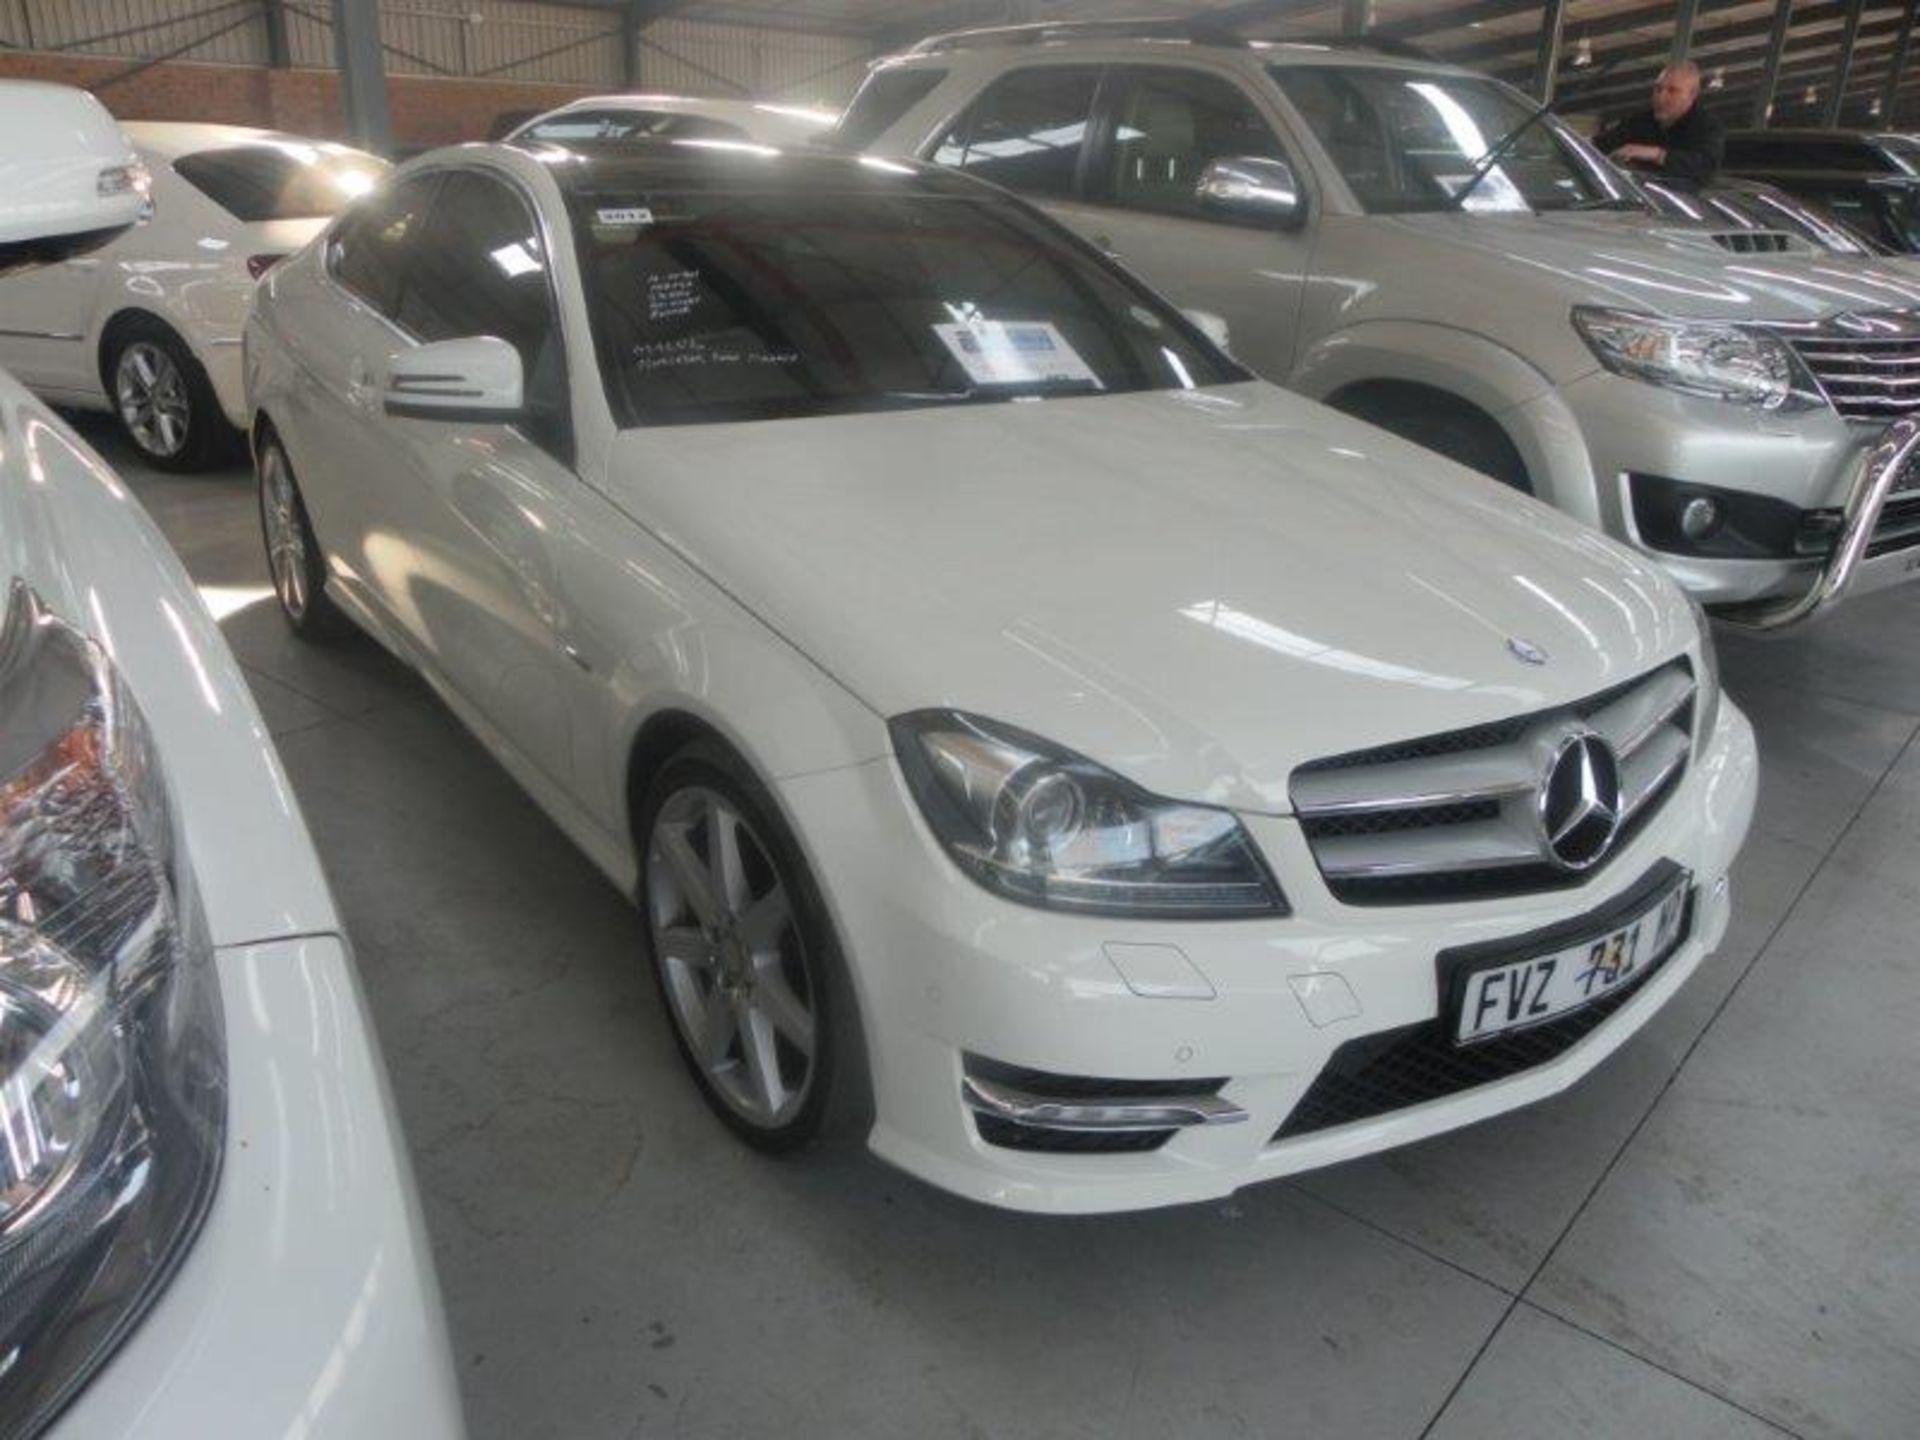 2012 FVZ731MP Mercedes-Benz C180 BE Coupe Auto (Vin No: WDD2043492F937240 )(Black Leather, - Image 3 of 5